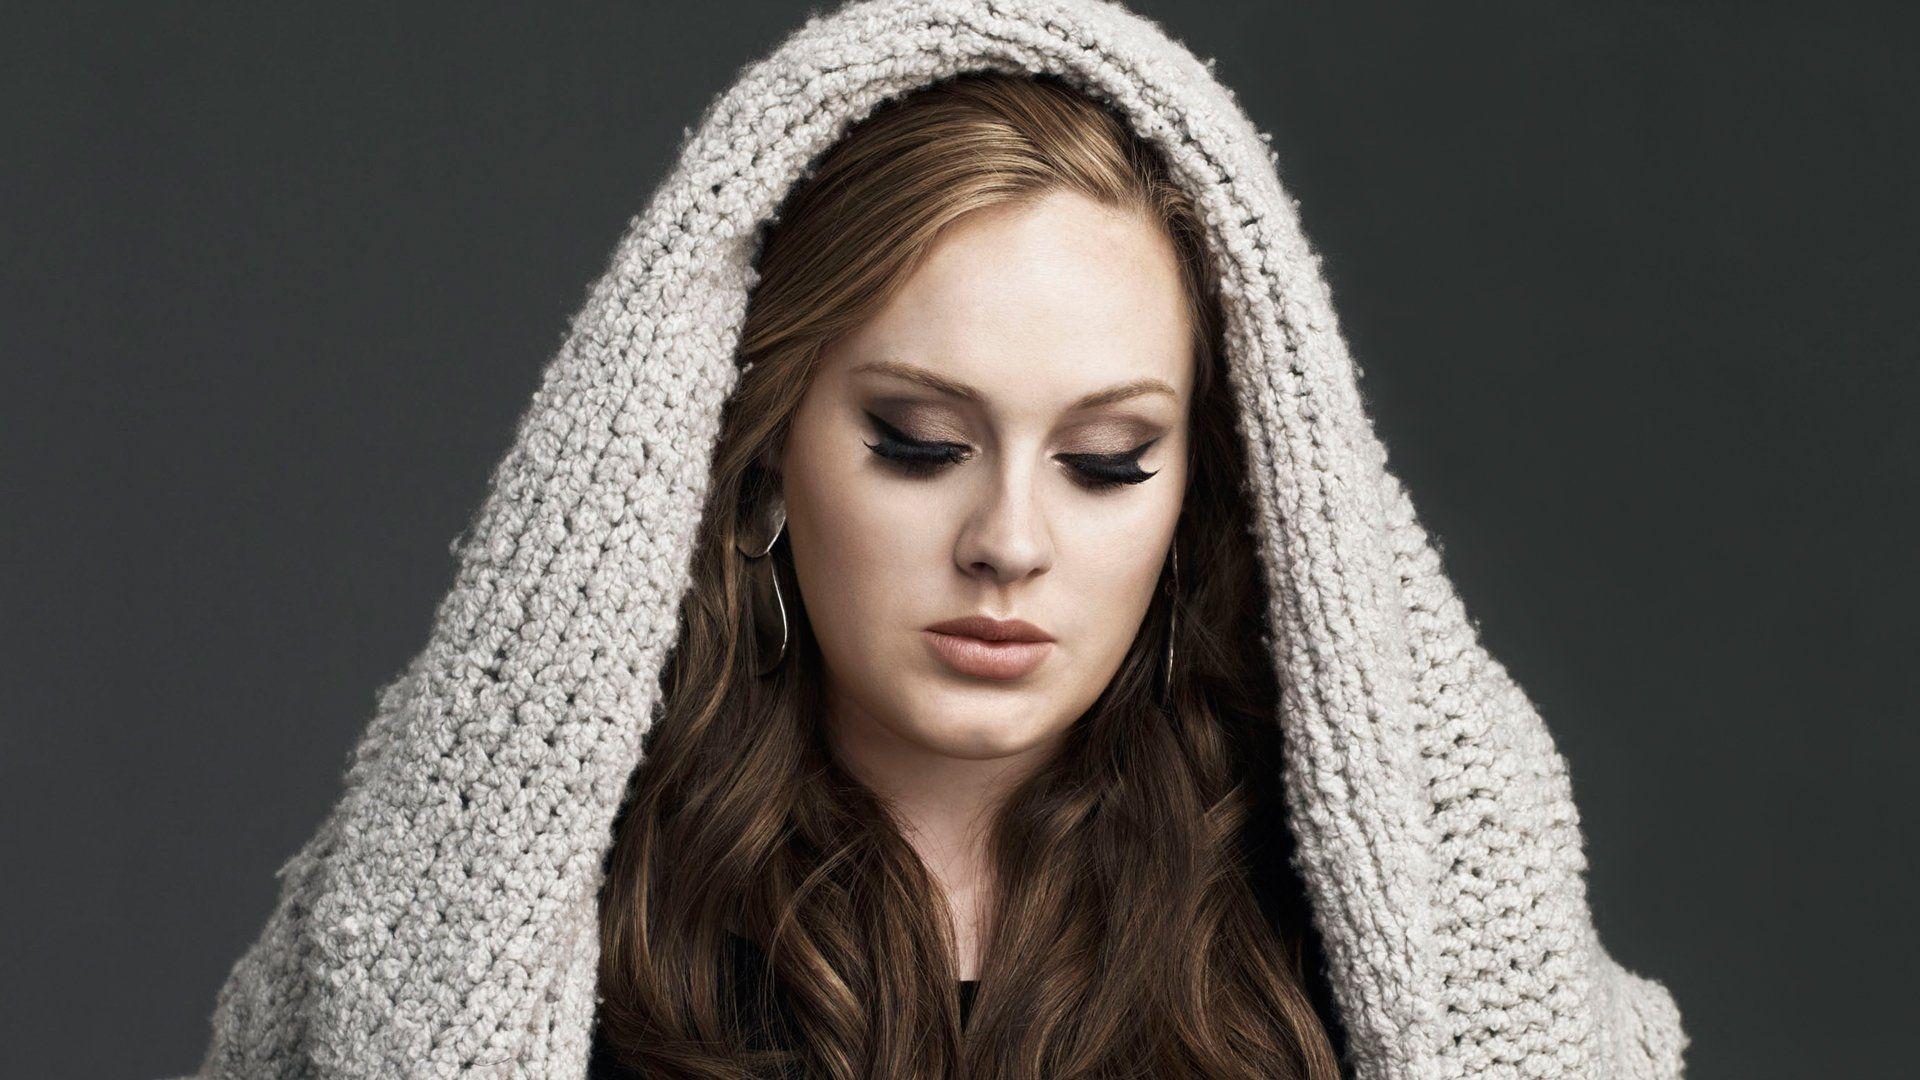 Adele Wallpapers Top Free Adele Backgrounds Wallpaperaccess